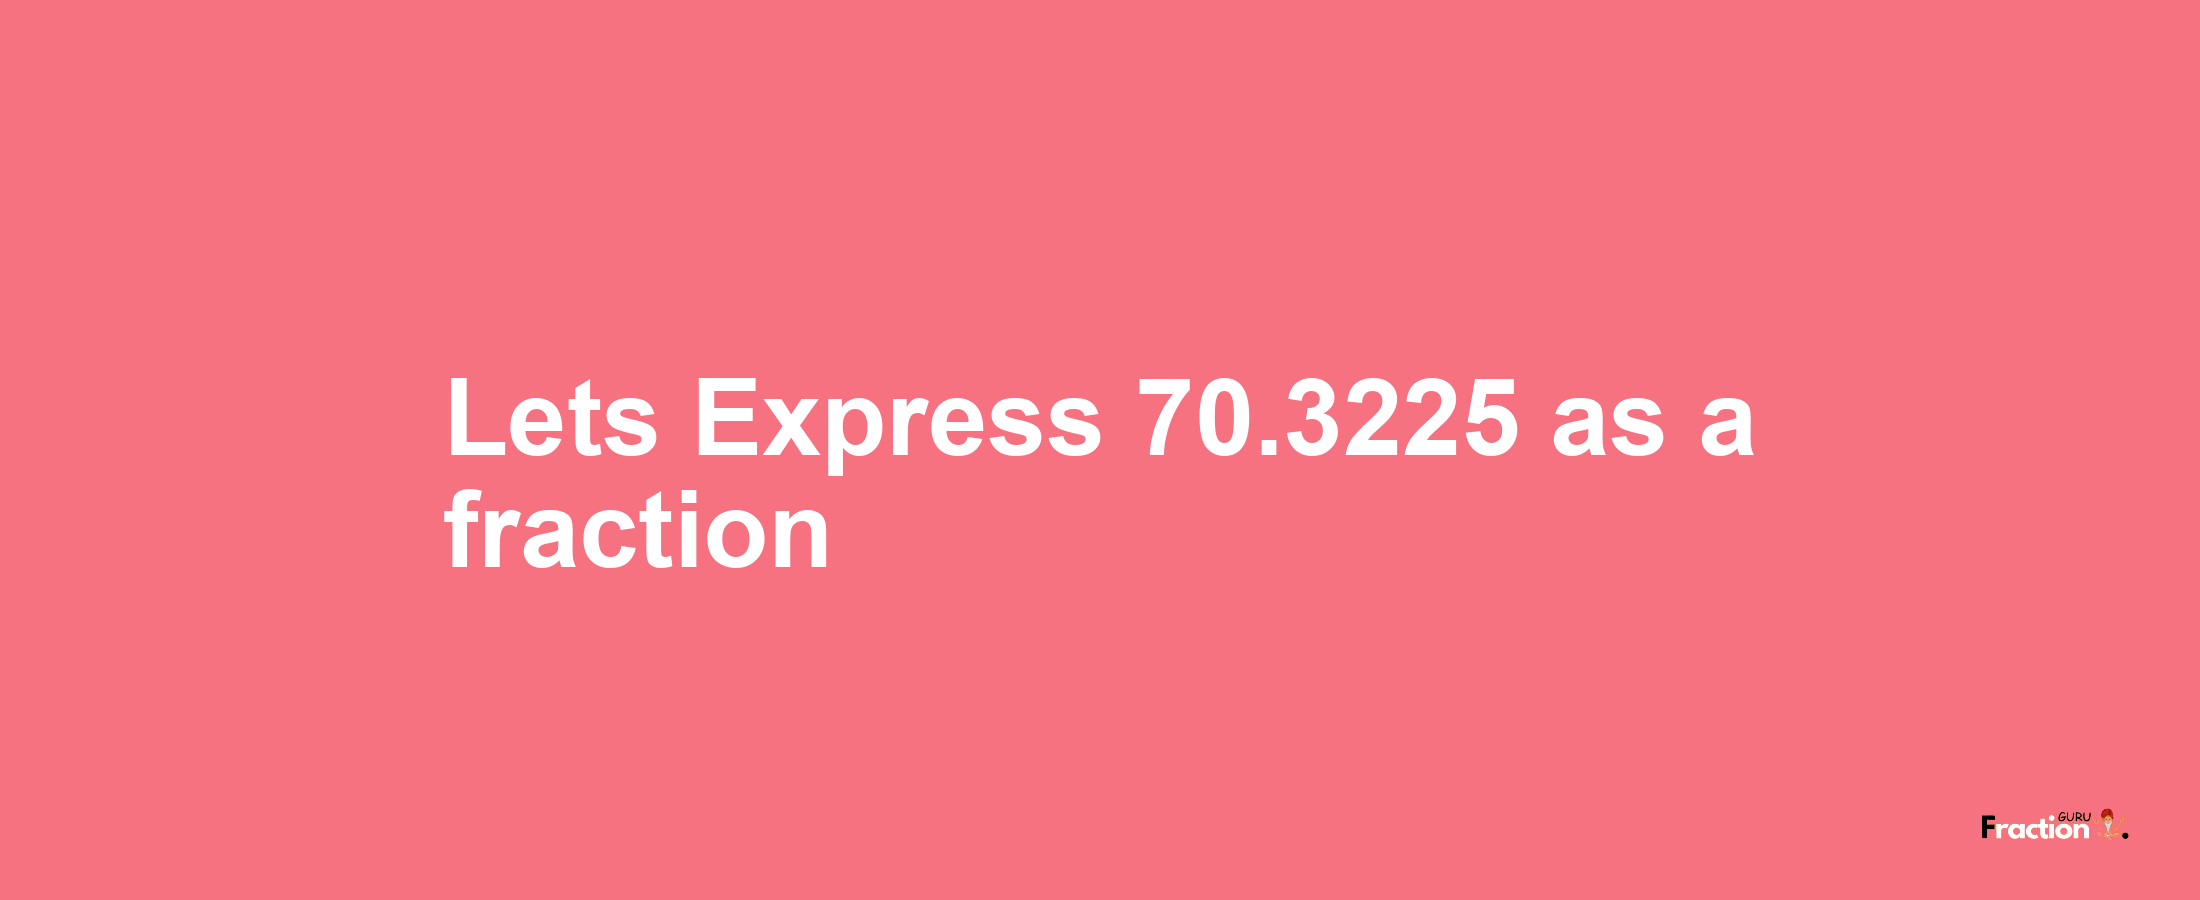 Lets Express 70.3225 as afraction